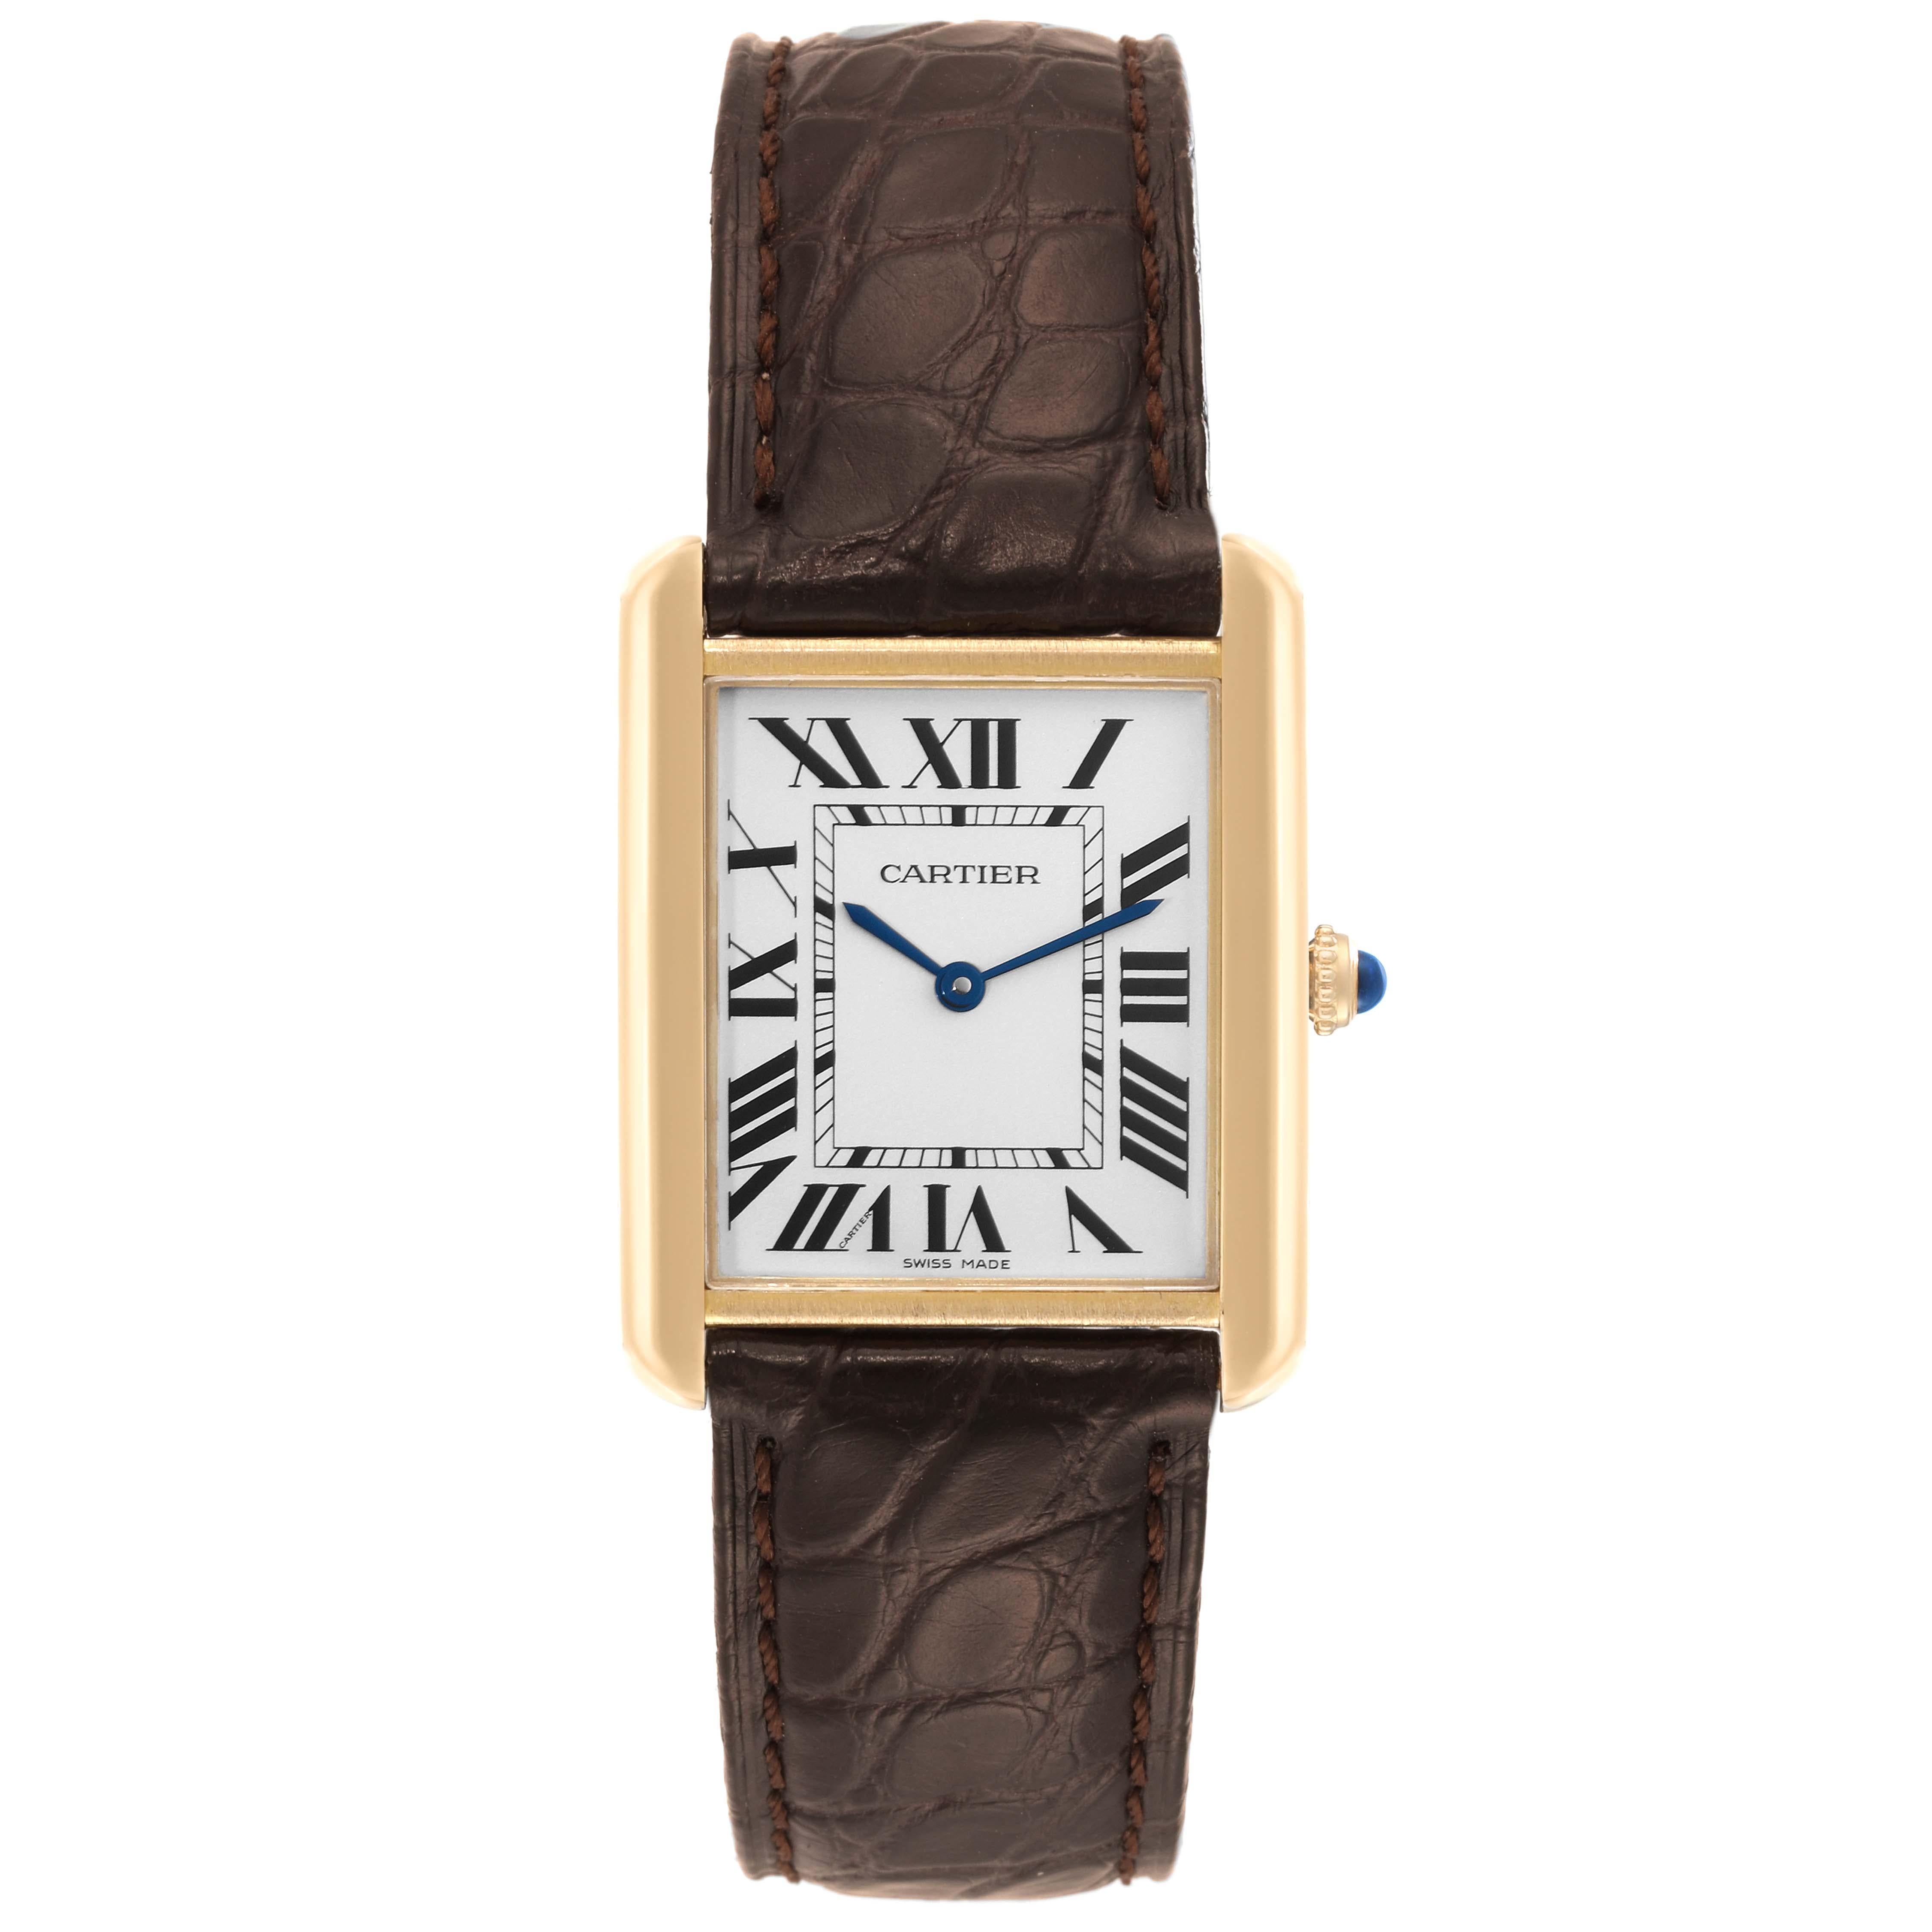 Cartier Tank Solo Yellow Gold Steel Brown Strap Mens Watch W1018855. Quartz movement. 18k yellow gold case 34.0 x 27.0 mm with stainless steel caseback. Circular grained crown set with a blue spinel cabochon. . Scratch resistant sapphire crystal.